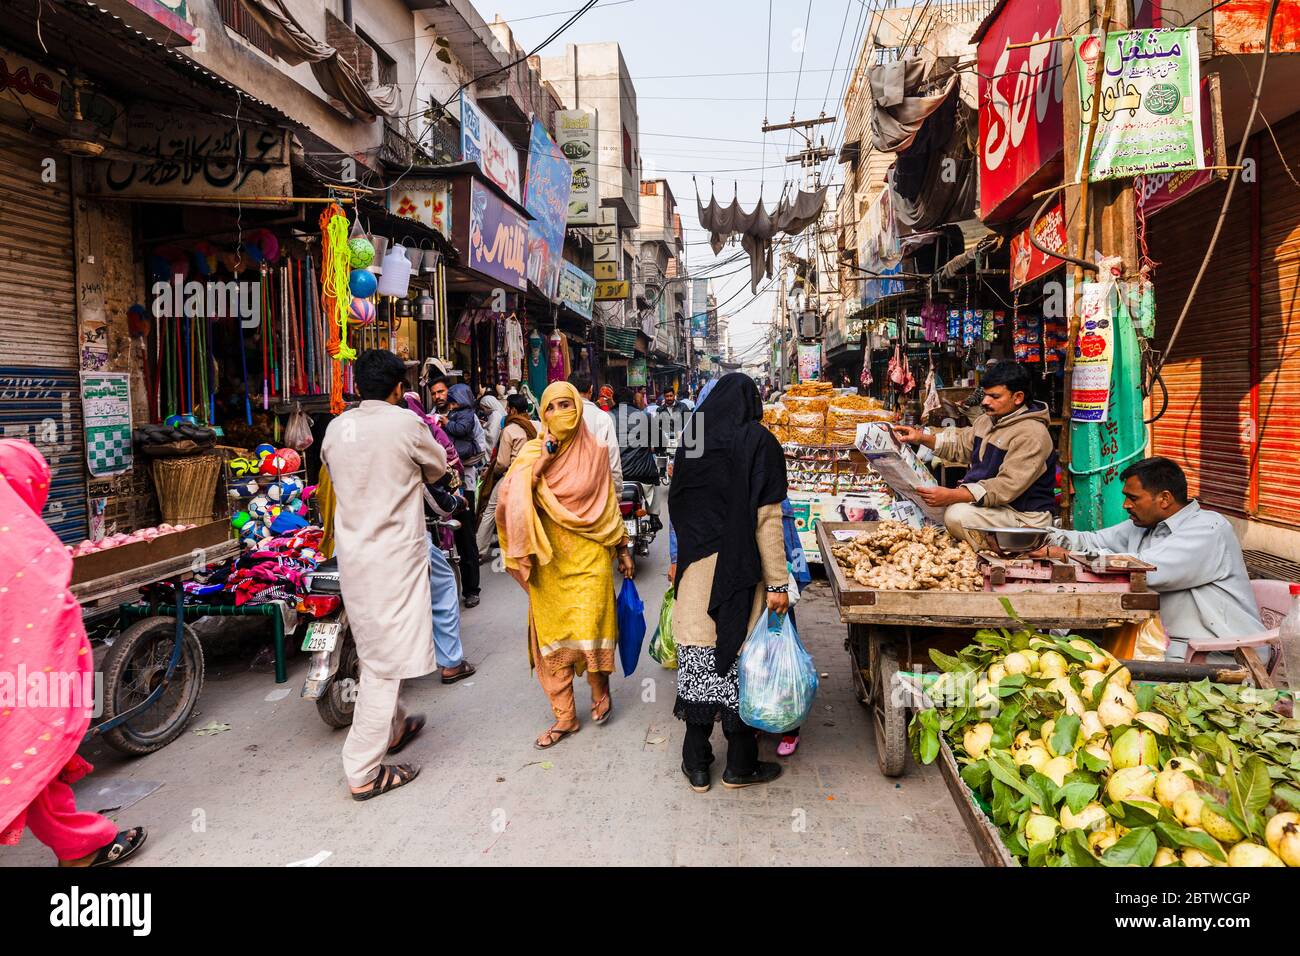 Market of Wazirabad town, estimated one of  ancient Alexandria city, Gujranwala District, Punjab Province, Pakistan, South Asia, Asia Stock Photo